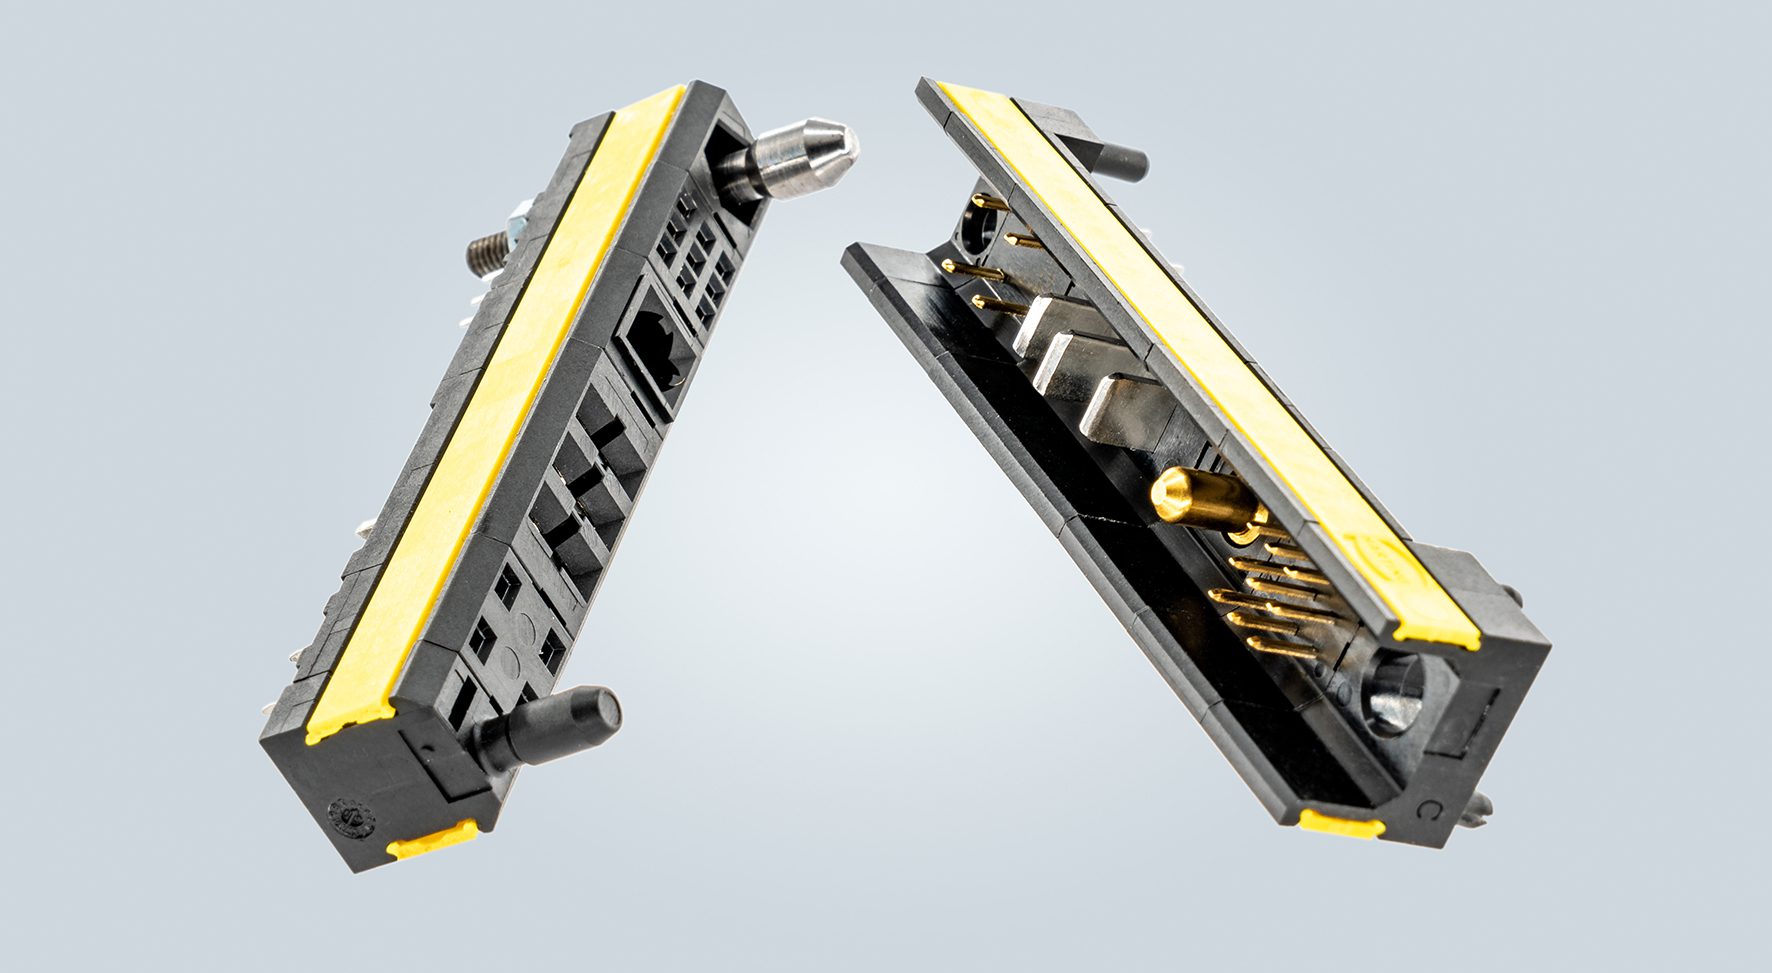 HARTING’s har-modular PCB connector is a modular concept based on reliable DIN 41612 strips